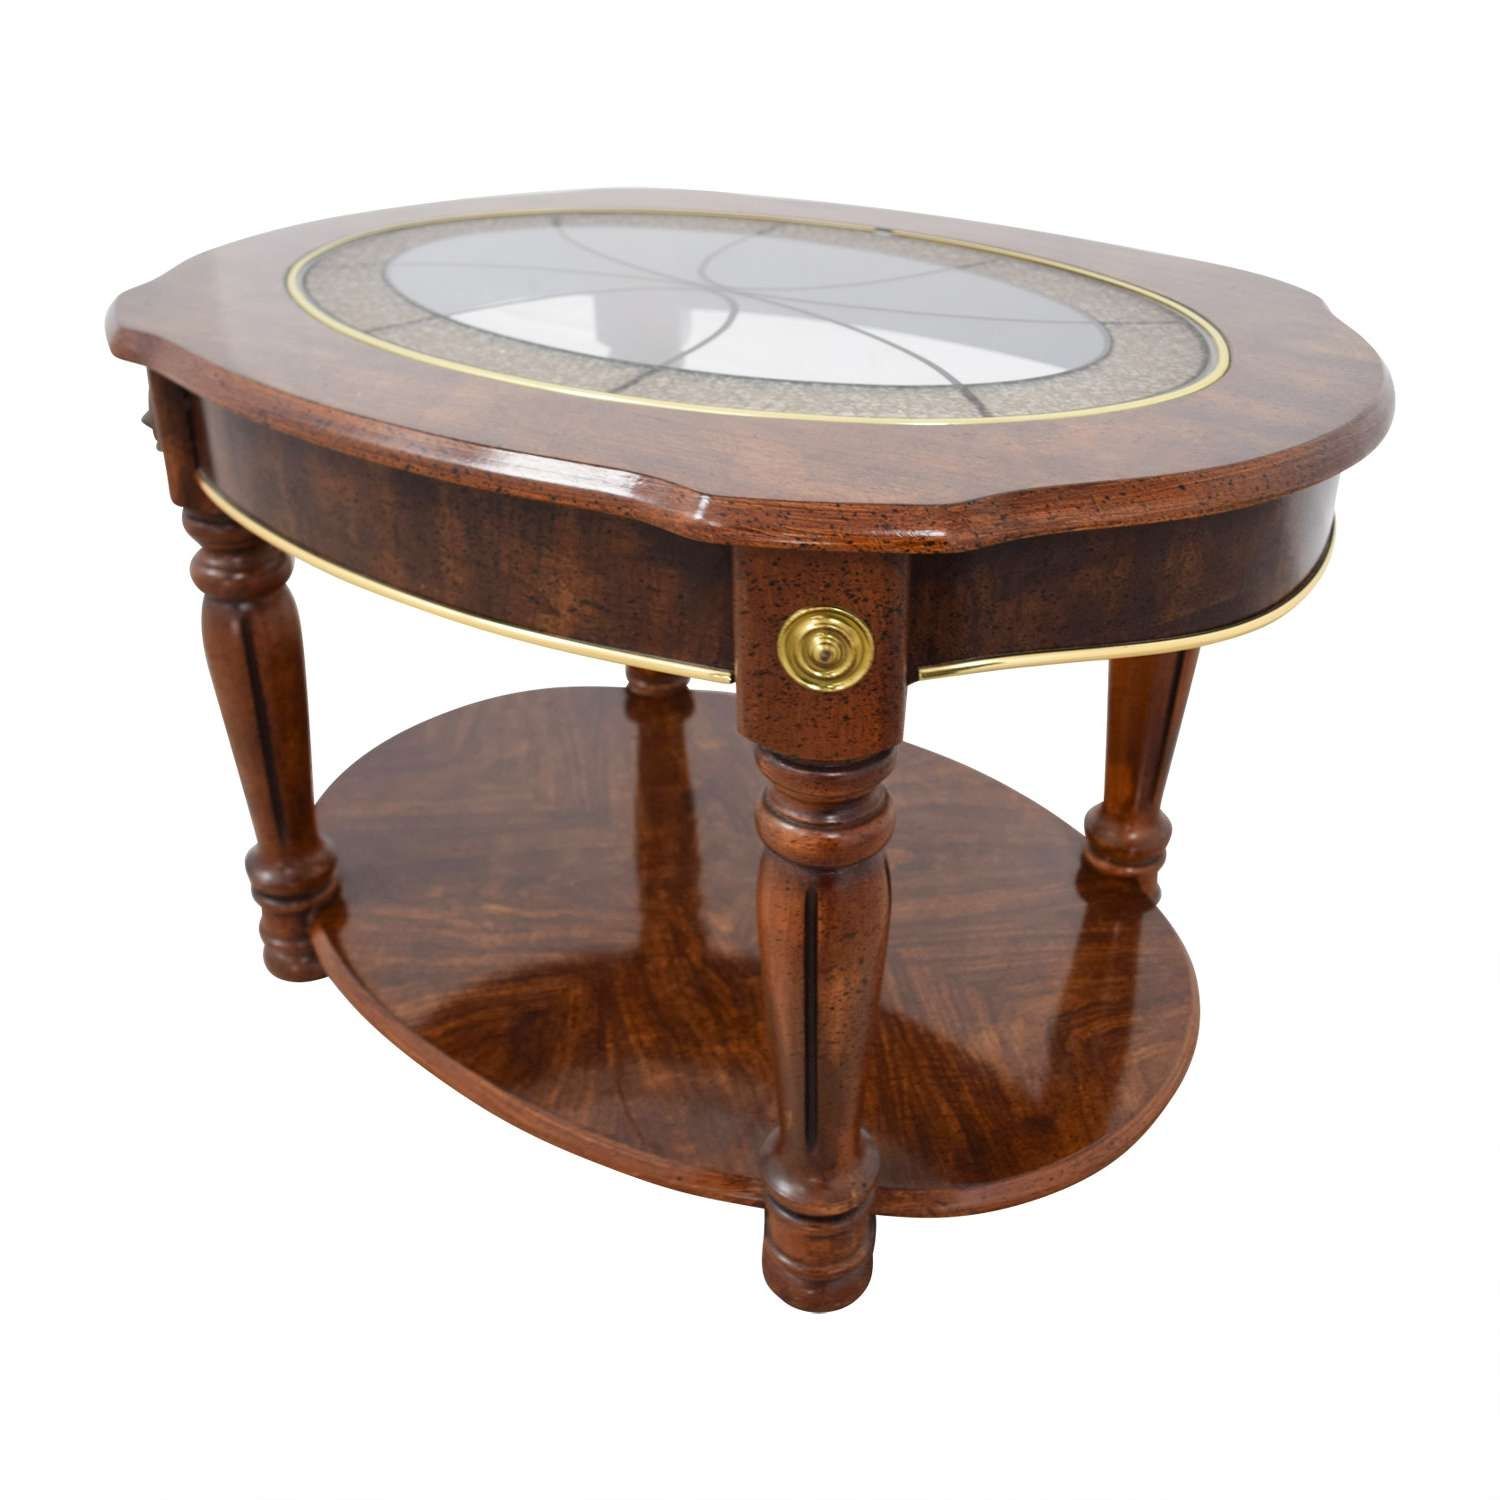 [%recent Small Round Coffee Tables For 65% Off – Vintage Small Round Coffee Table / Tables|65% Off – Vintage Small Round Coffee Table / Tables Intended For Well Known Small Round Coffee Tables%] (View 3 of 20)